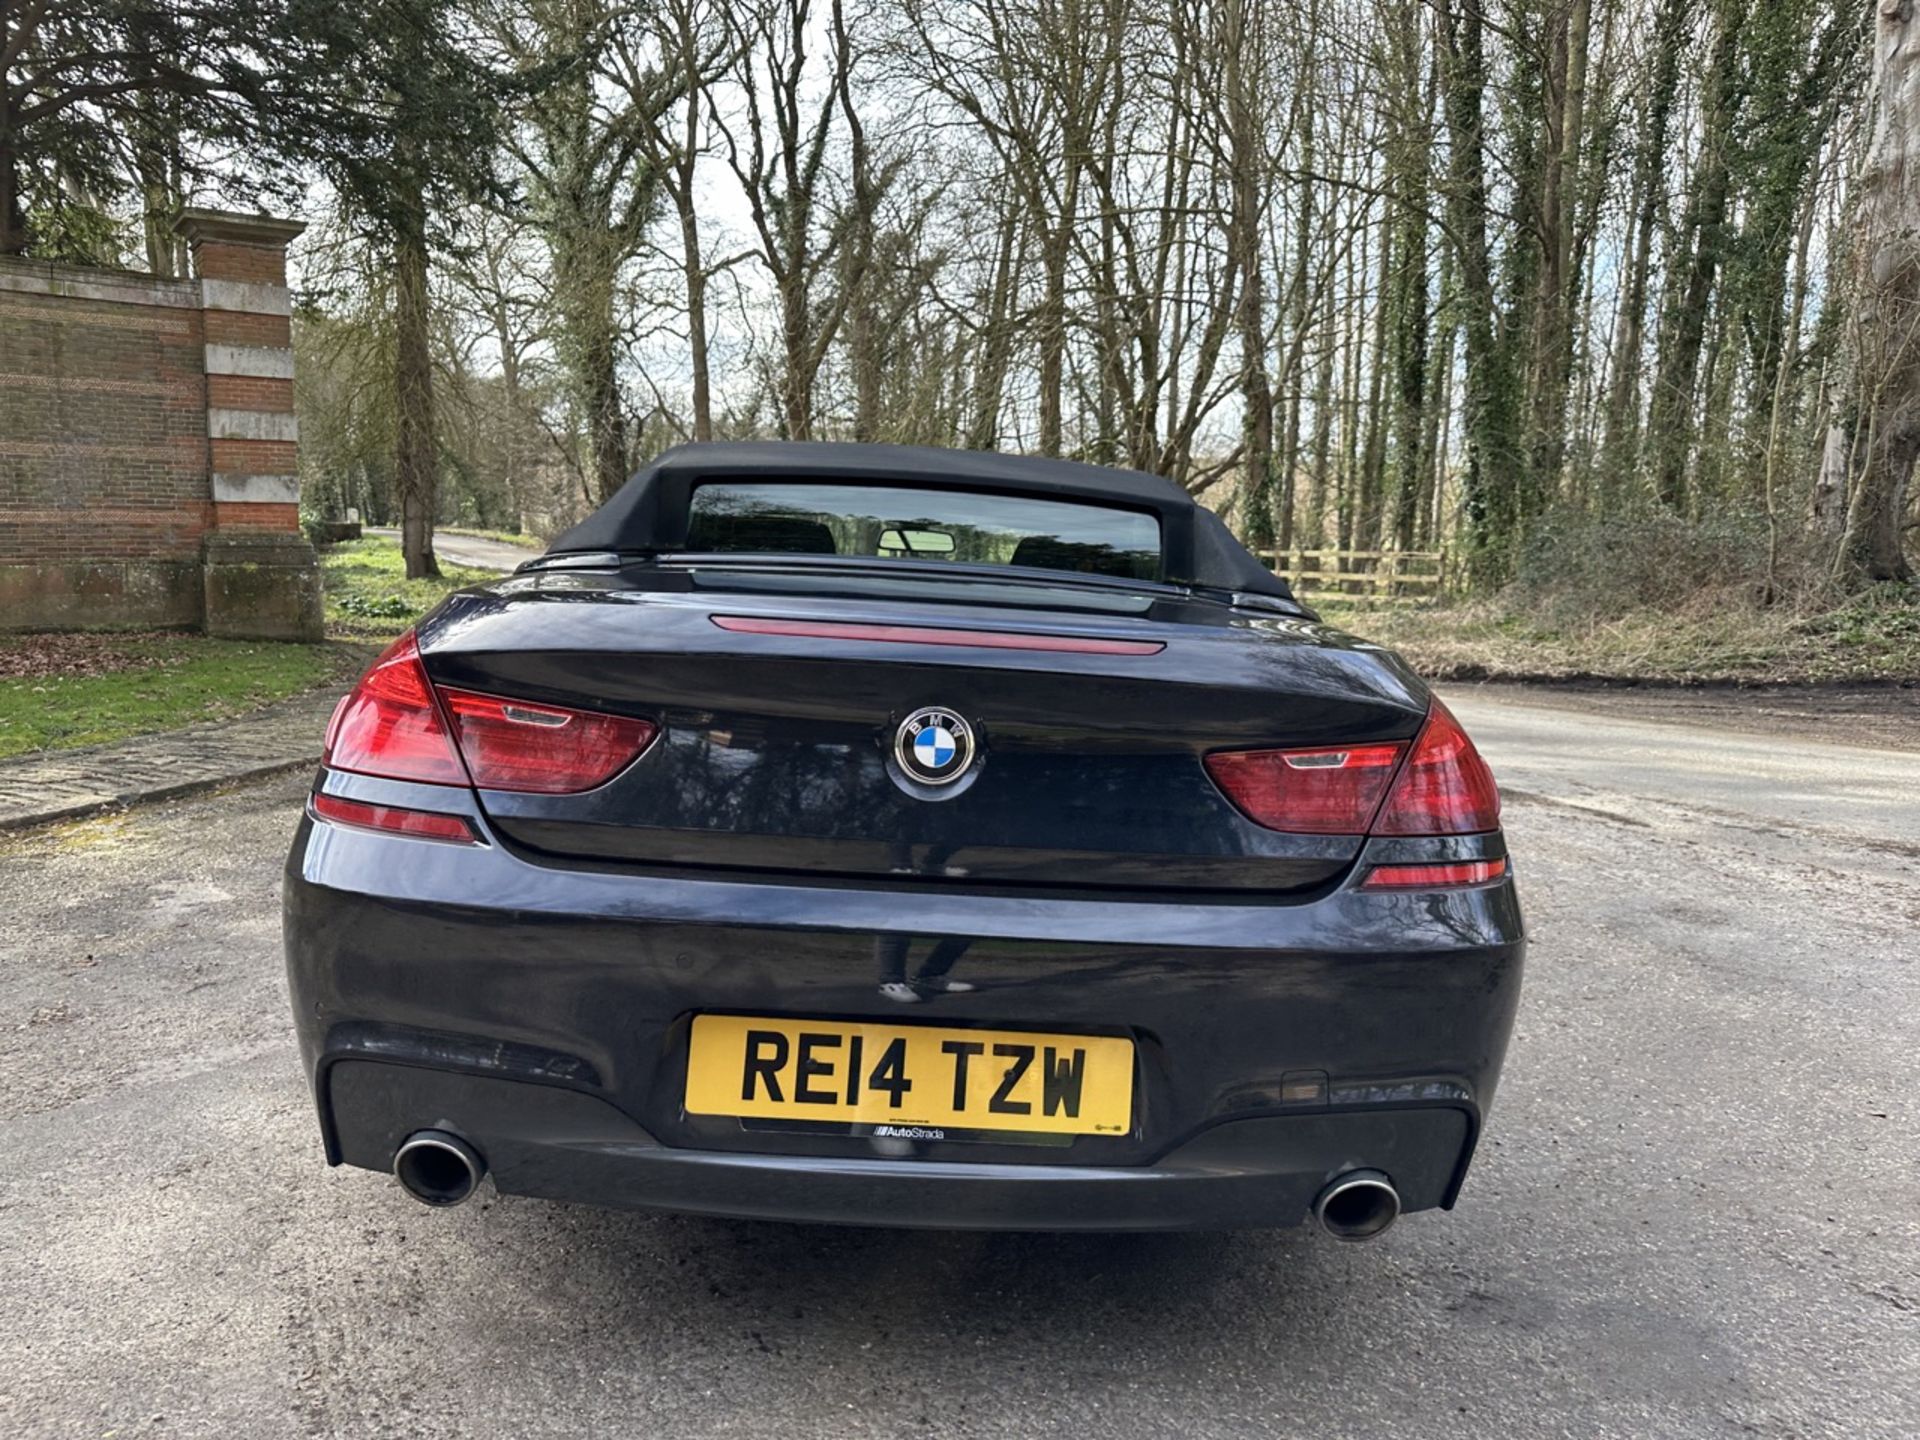 BMW 6 SERIES 640d (M SPORT) Ultimate Summer Car - AUTOMATIC - Convertible - 2014 - 3L Diesel - Image 10 of 18